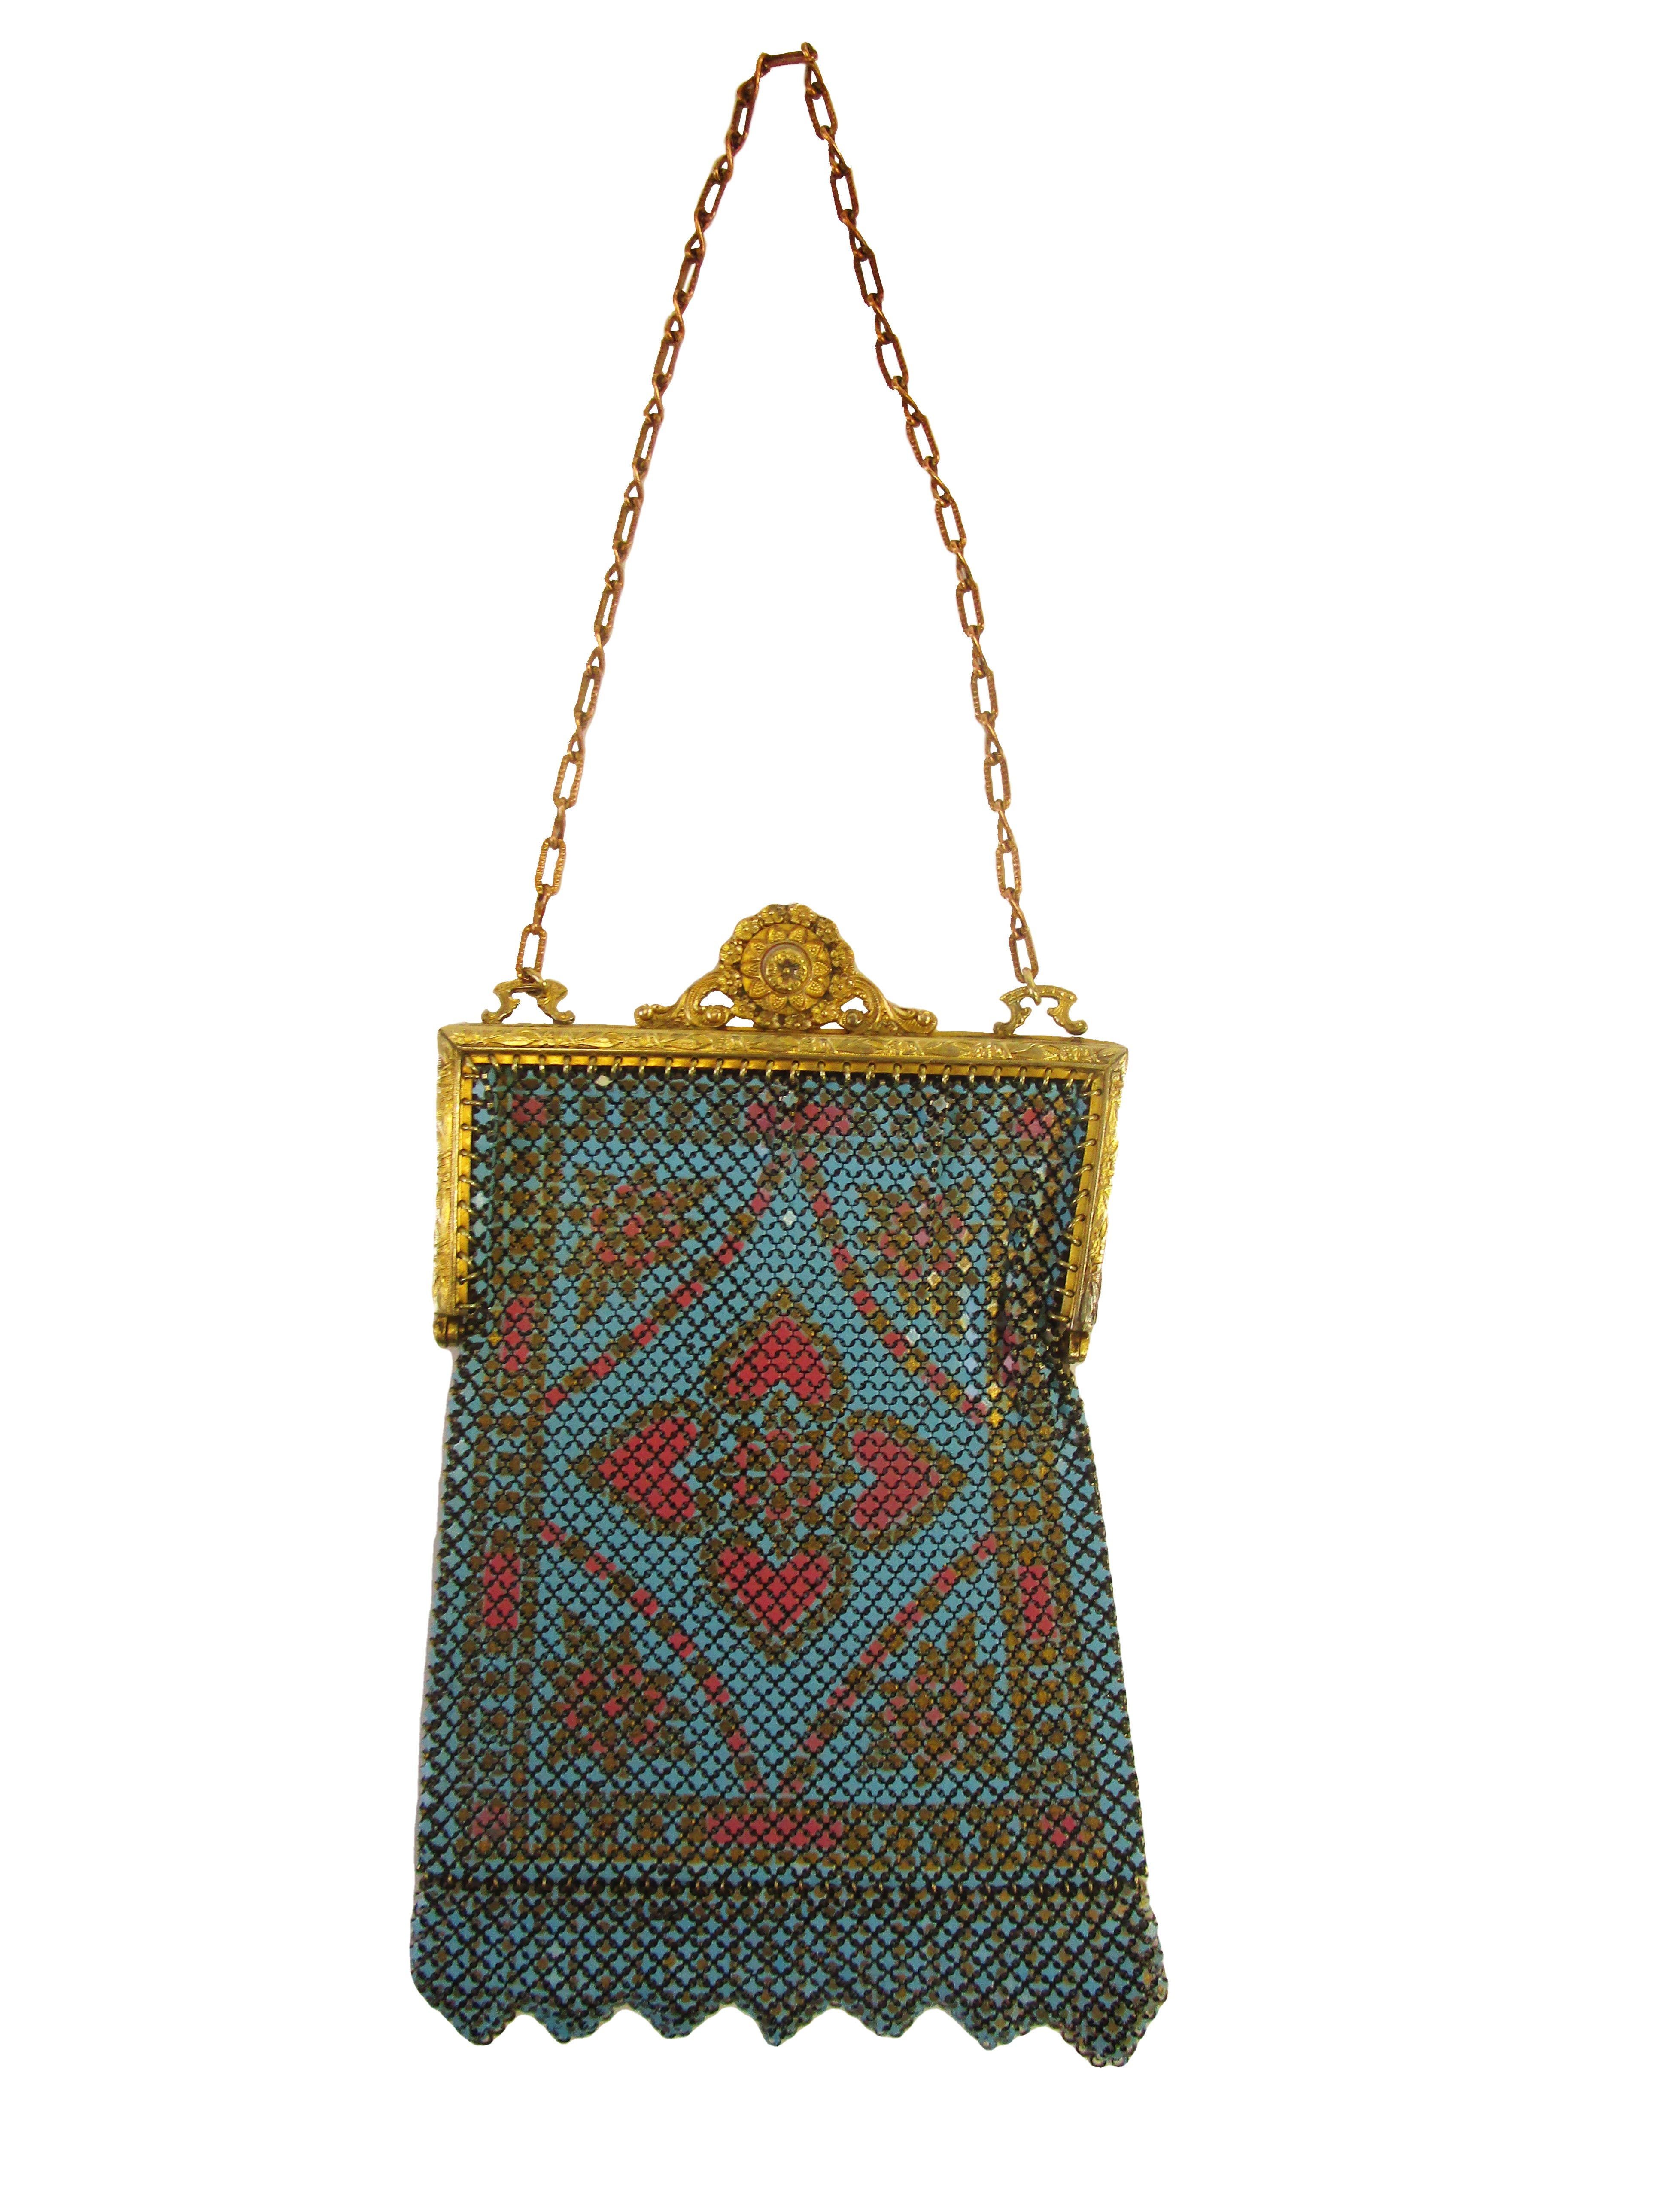 Constantinople Gold Beaded Clutch